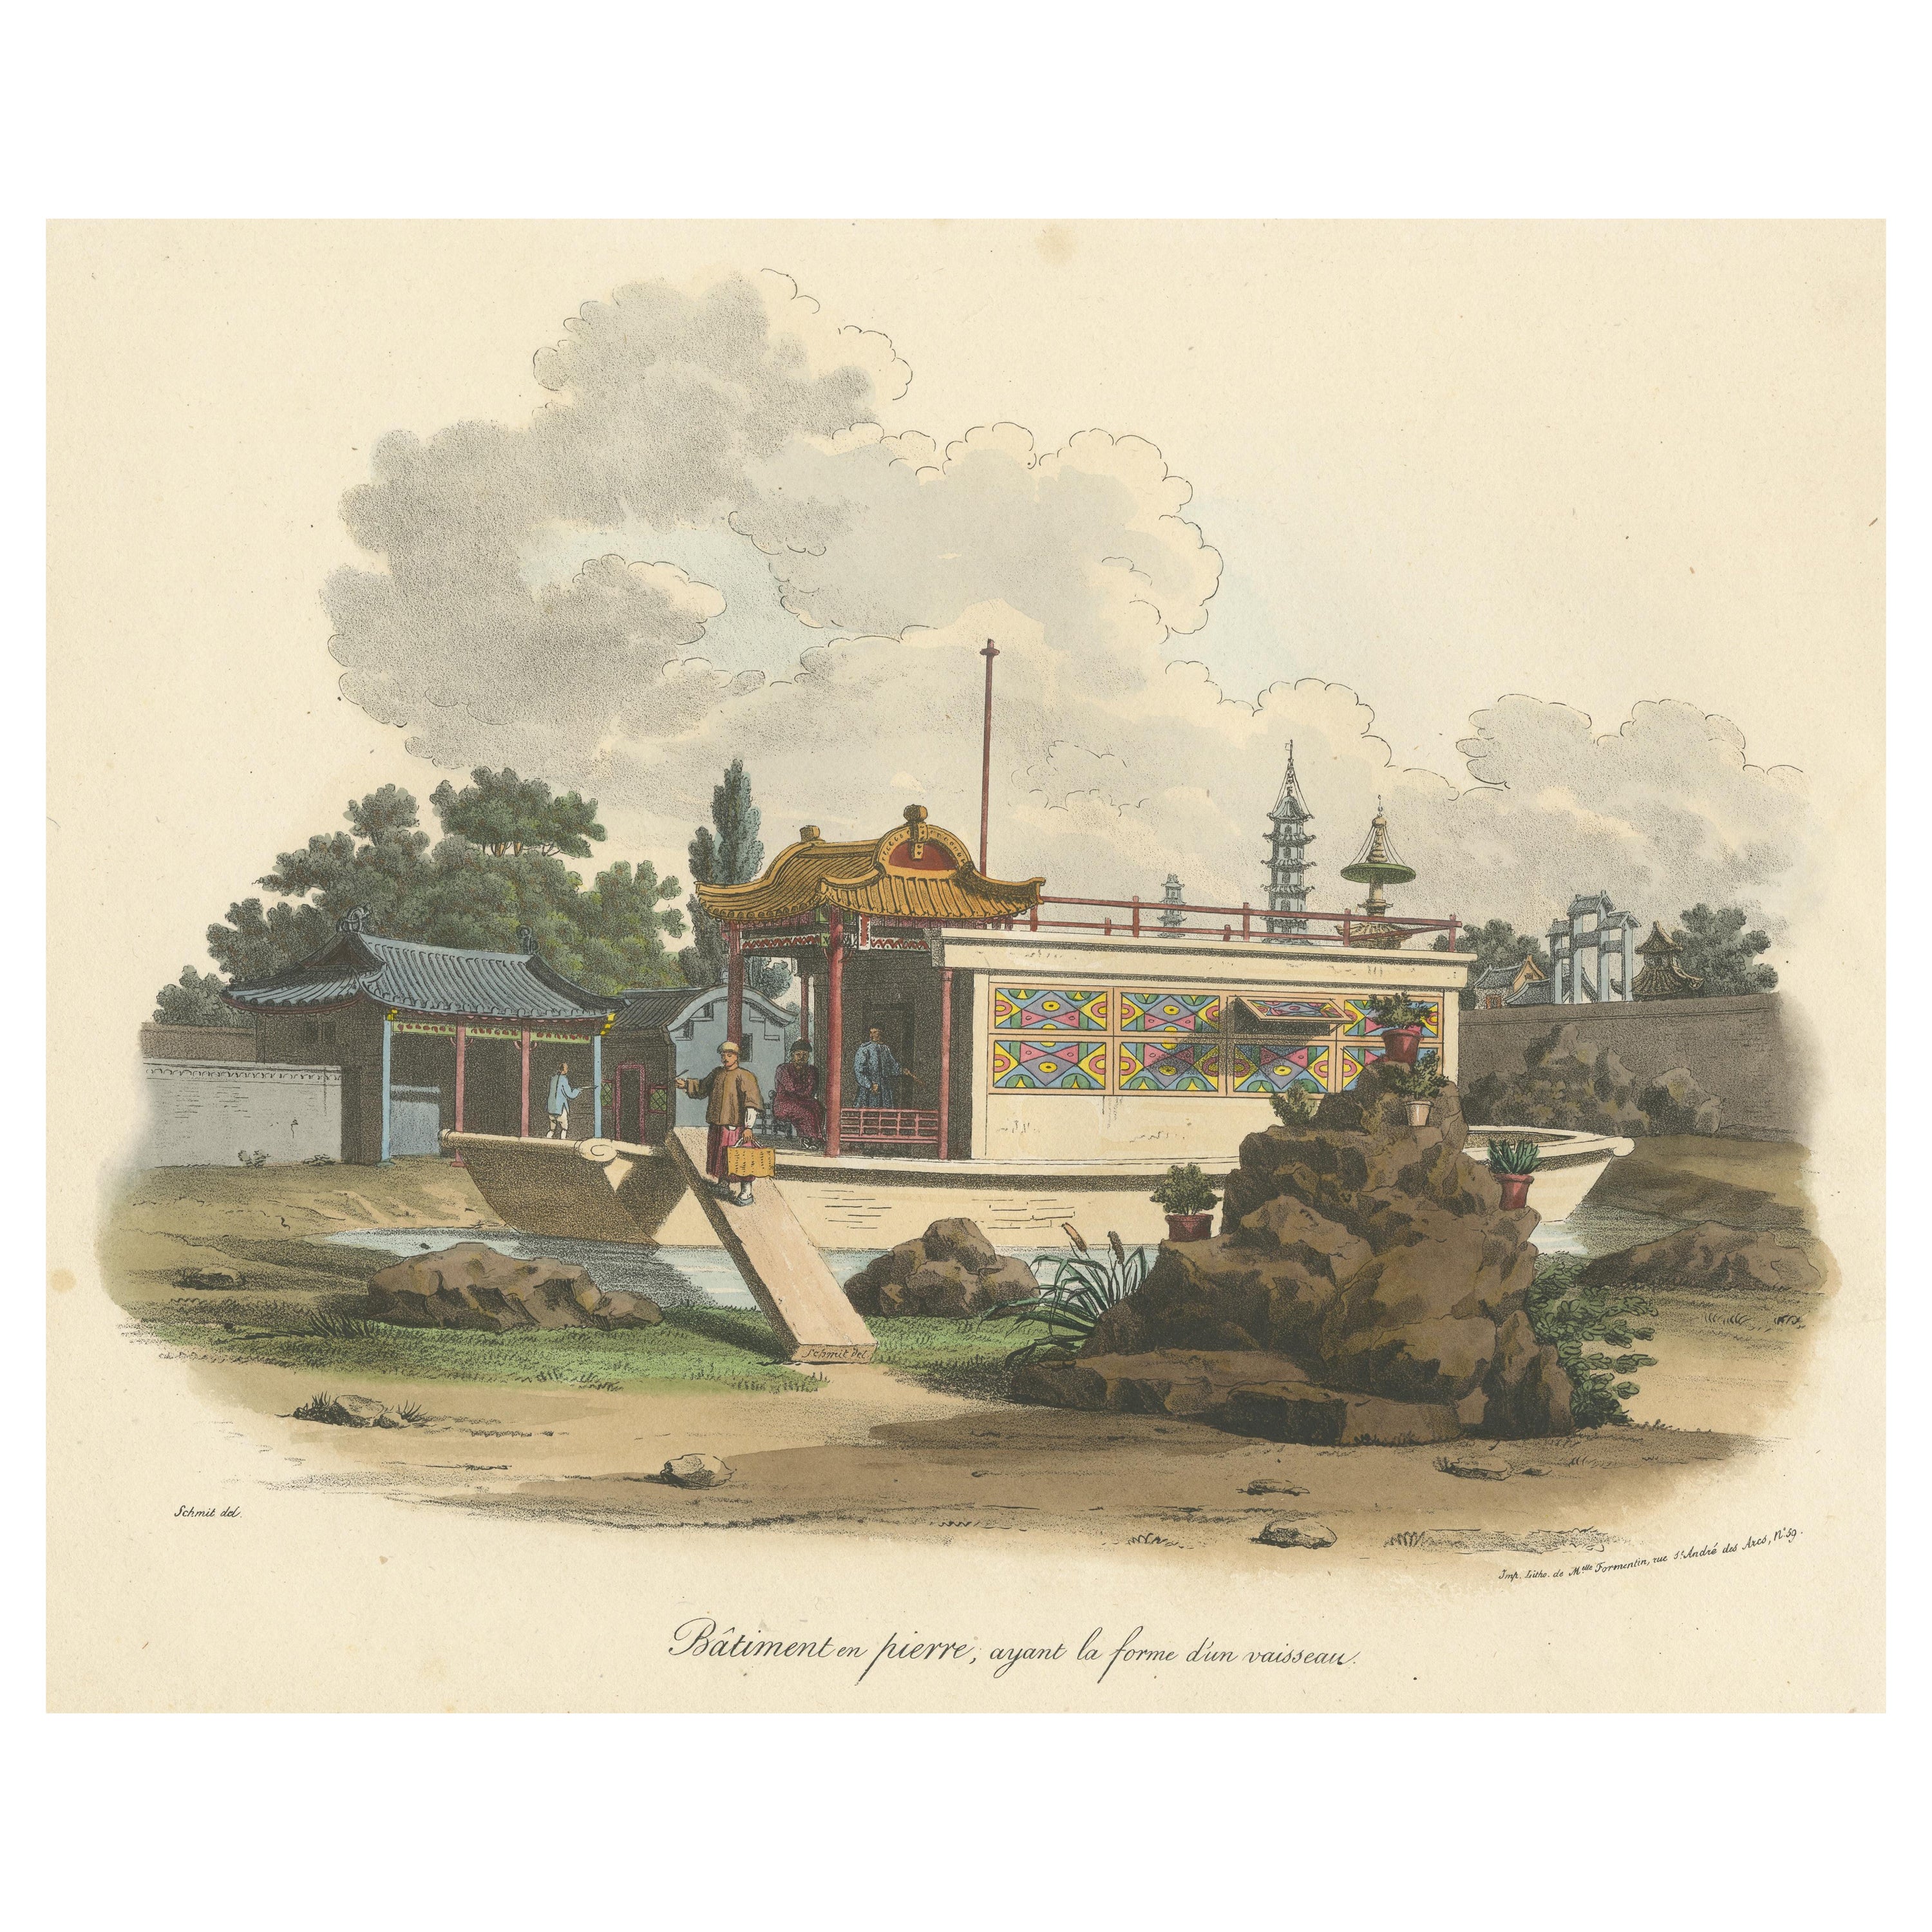 Antique Print of a Chinese Stone Building in the Shape of a Ship